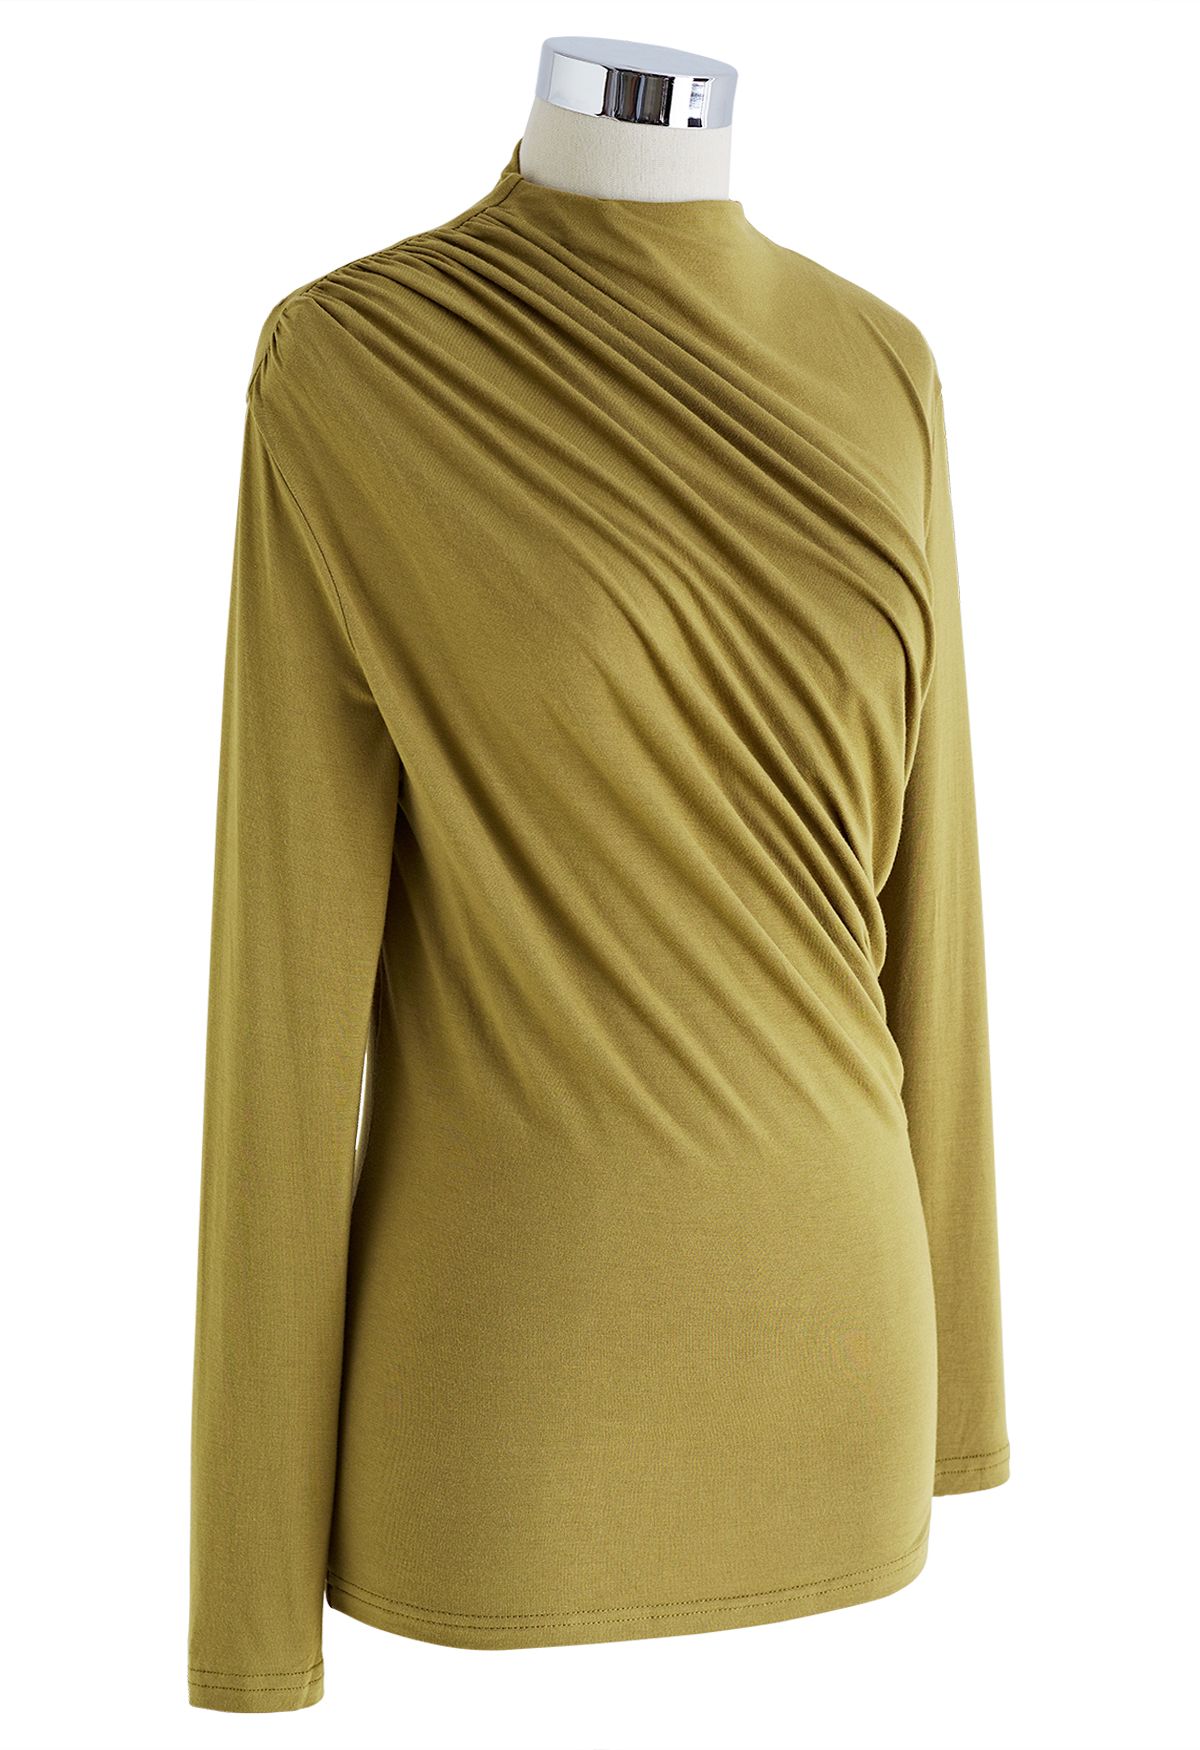 Ruched Long Sleeves Top in Olive - Retro, Indie and Unique Fashion